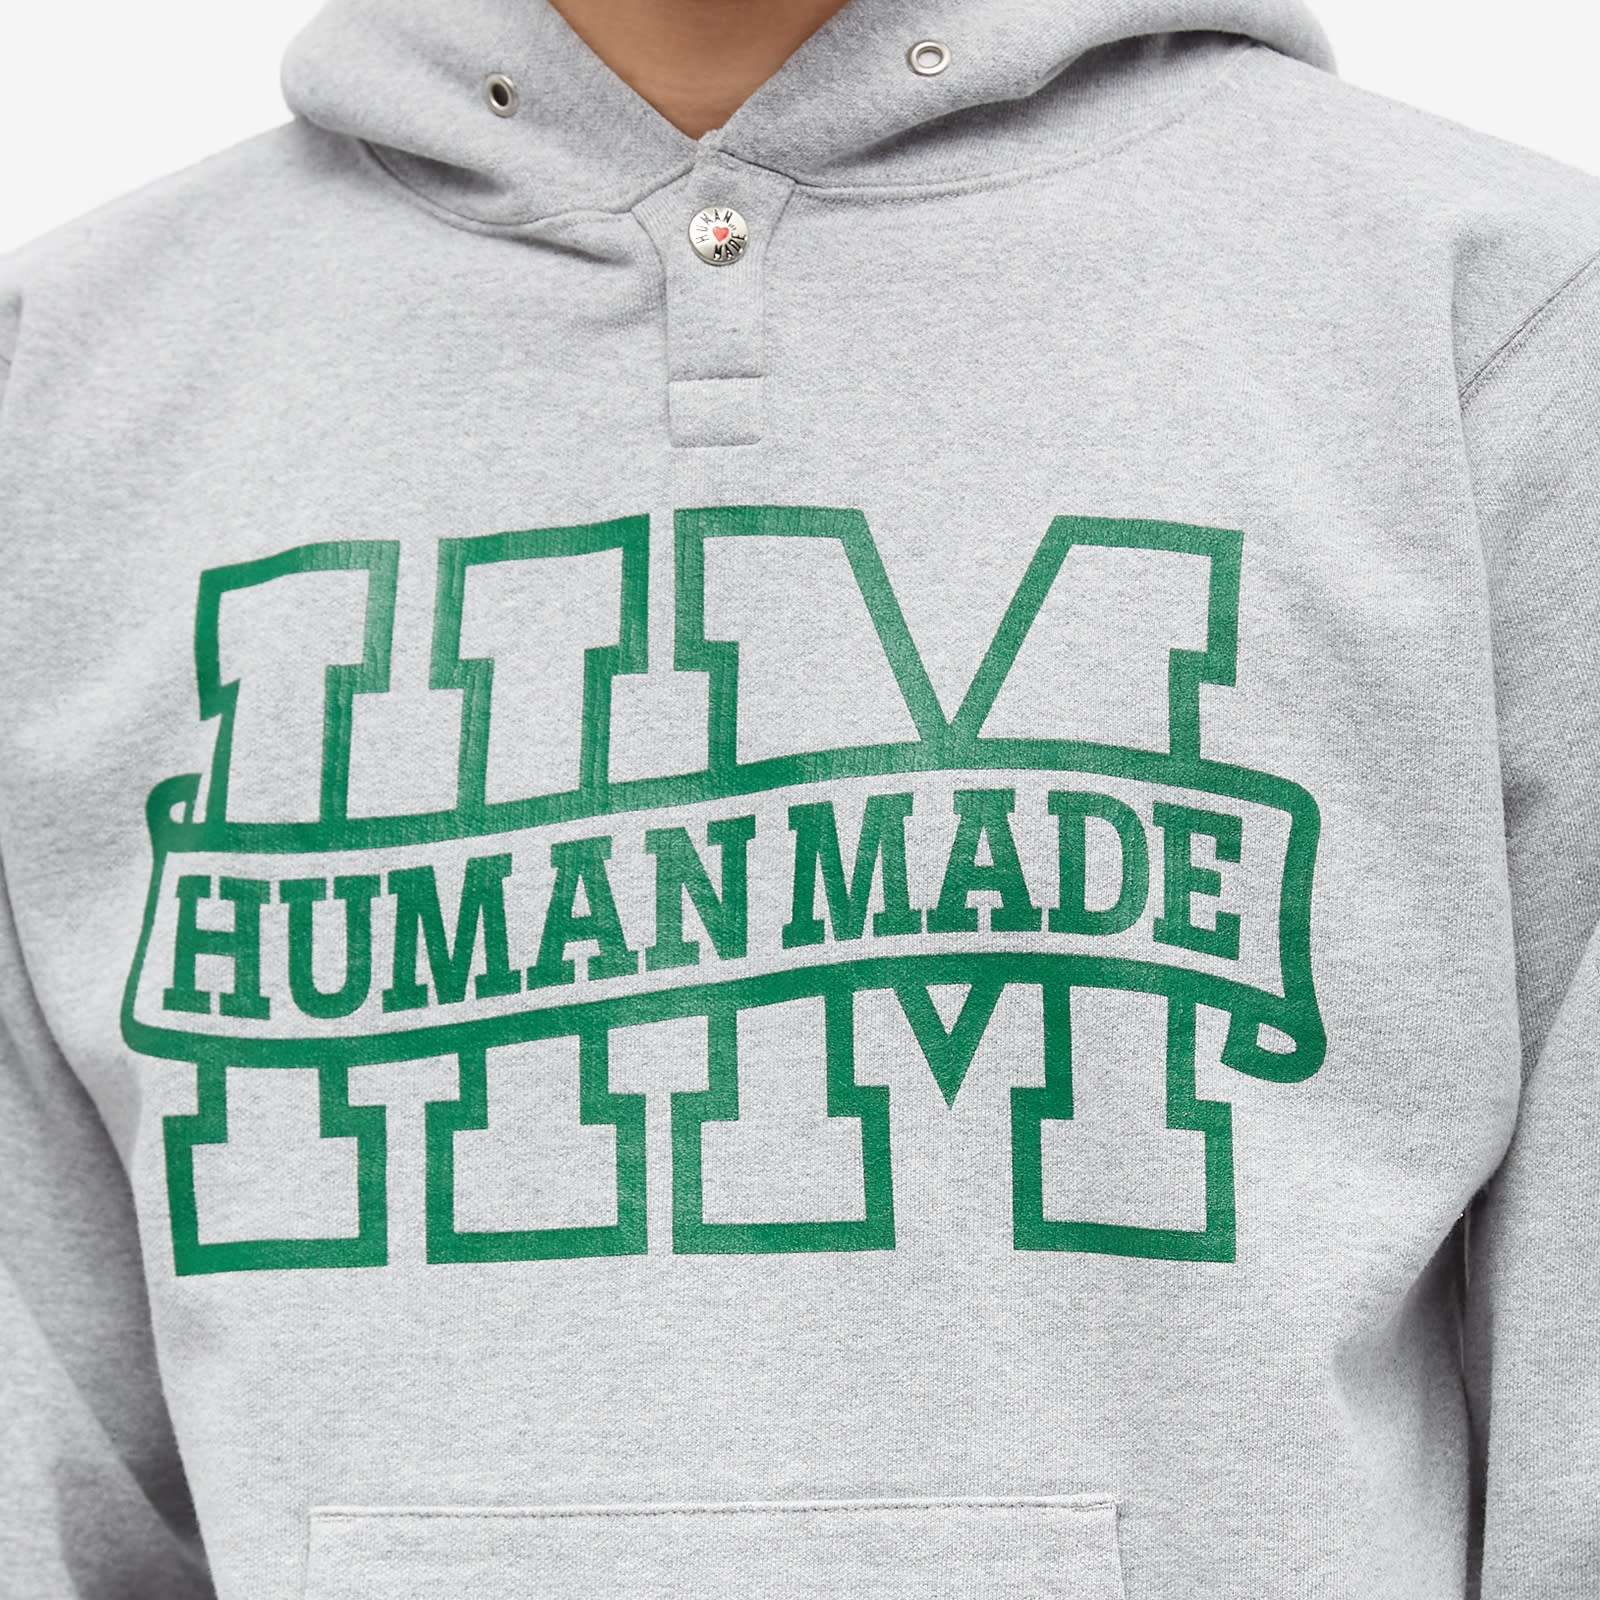 Human Made Human Made Snap Popover Hoodie | REVERSIBLE